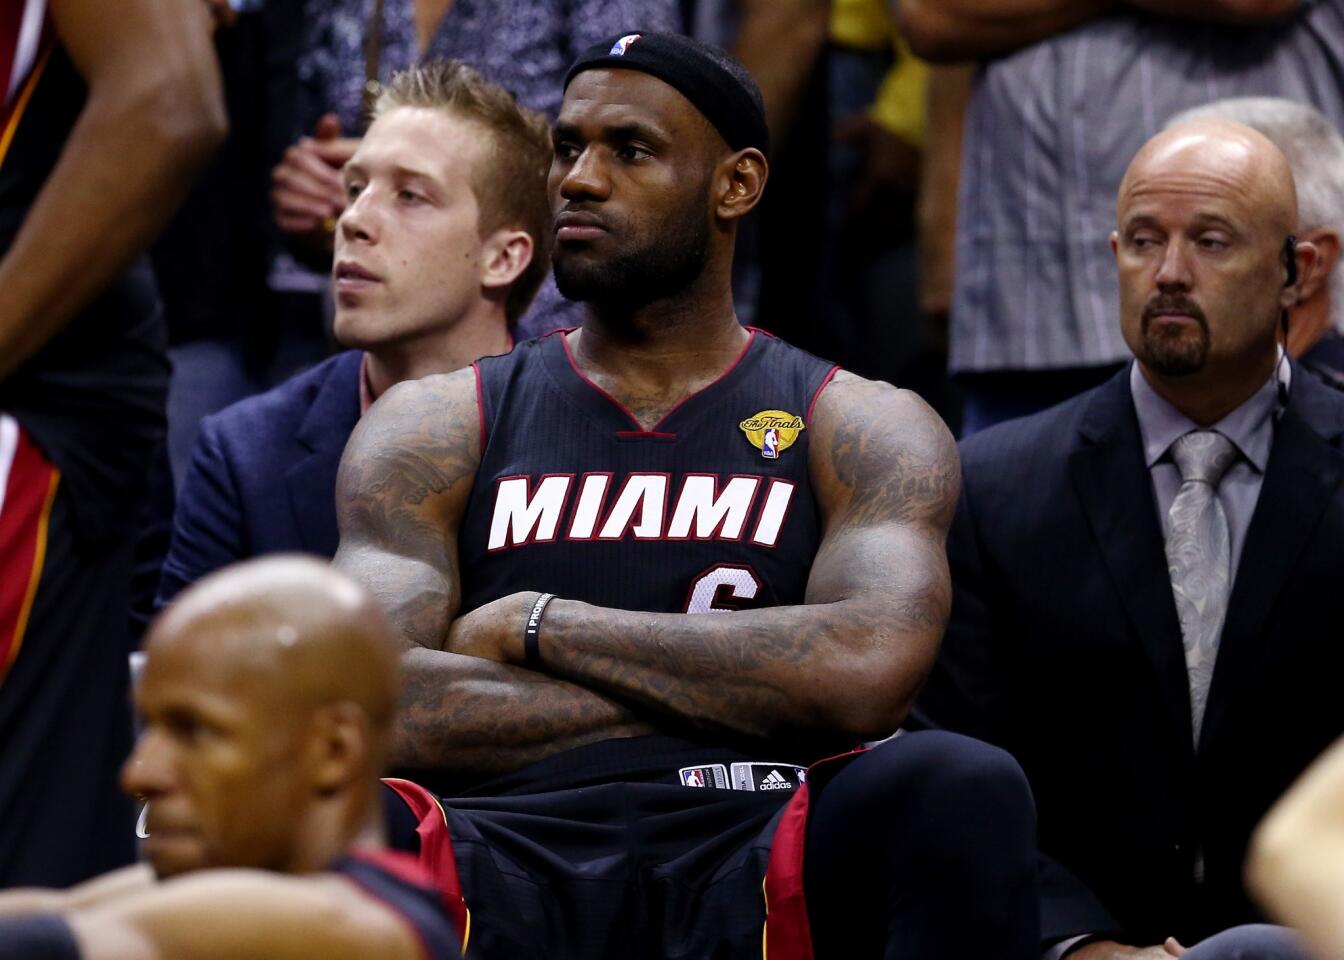 After the Miami Heat lost the 2014 NBA Finals to the San Antonio Spurs, LeBron James opted out of his contract with the Heat.